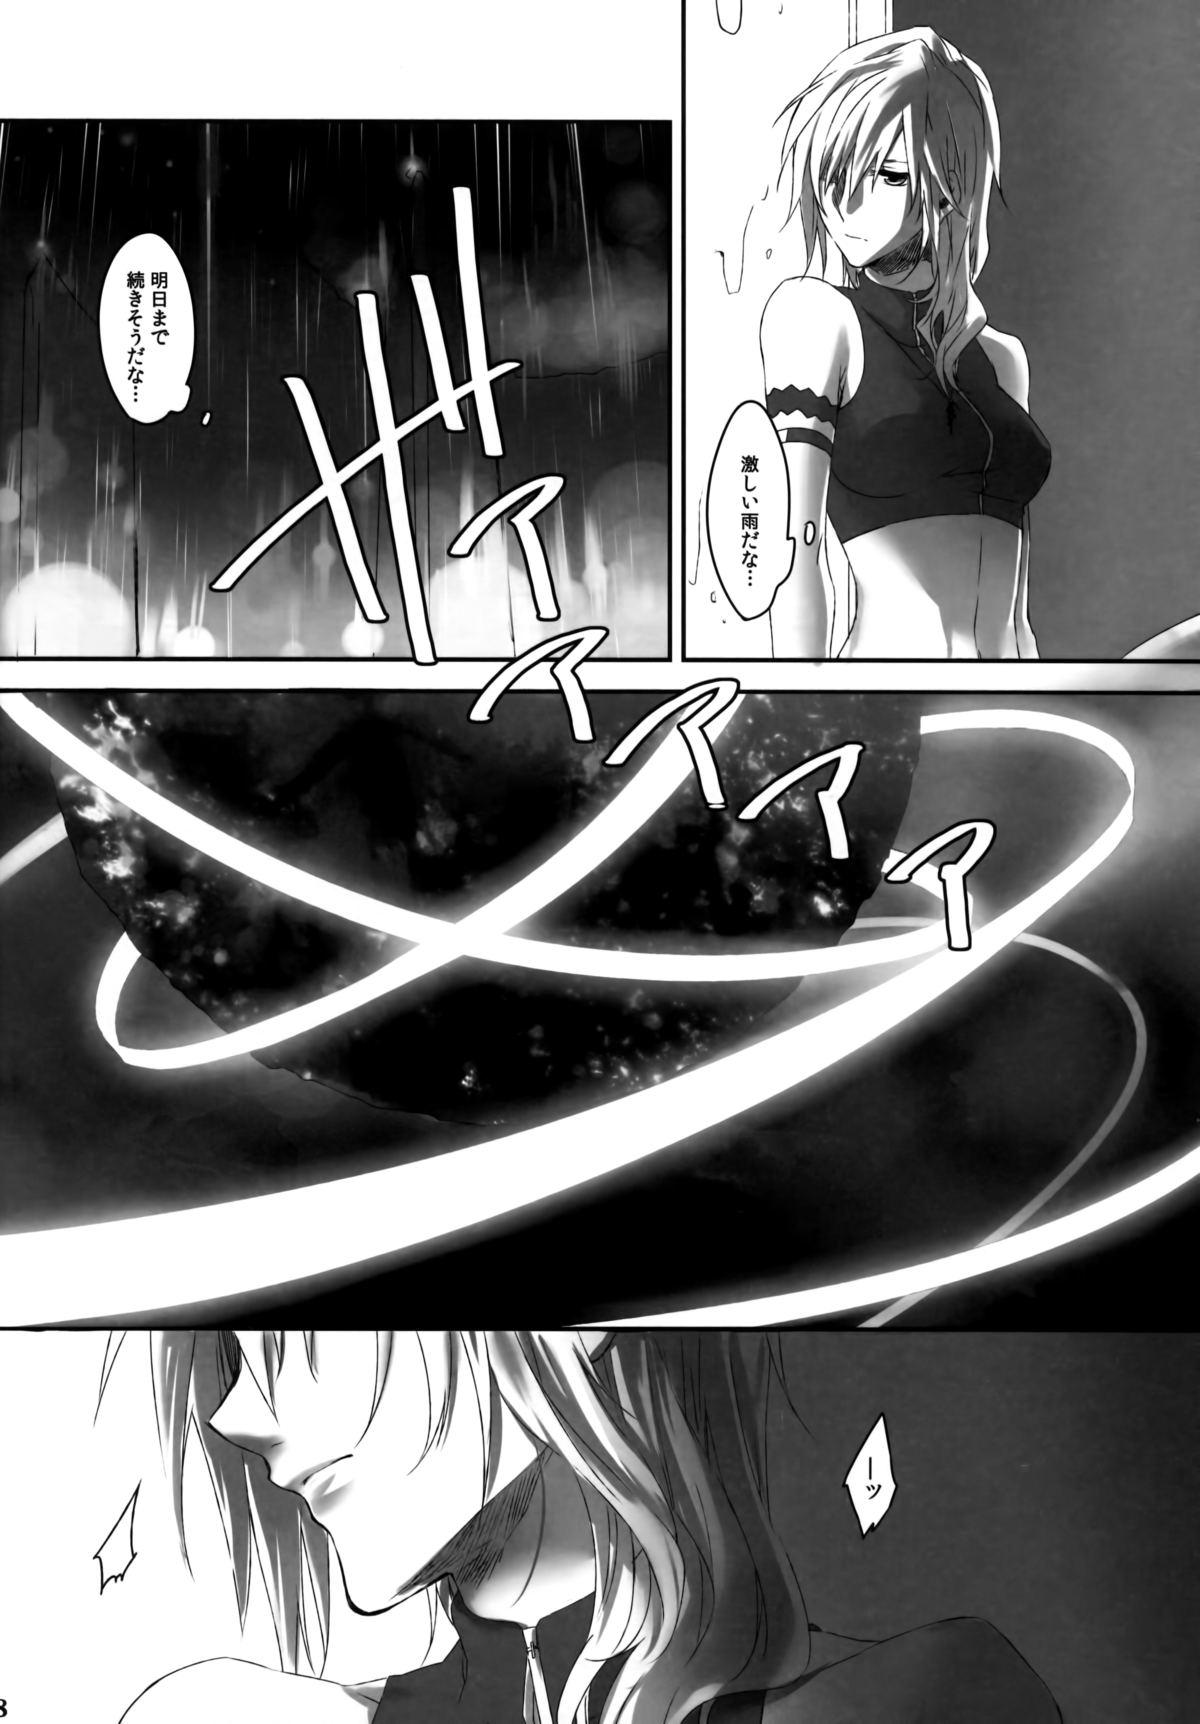 Relax Amayo no Hoshi - Final fantasy xiii Story - Page 8